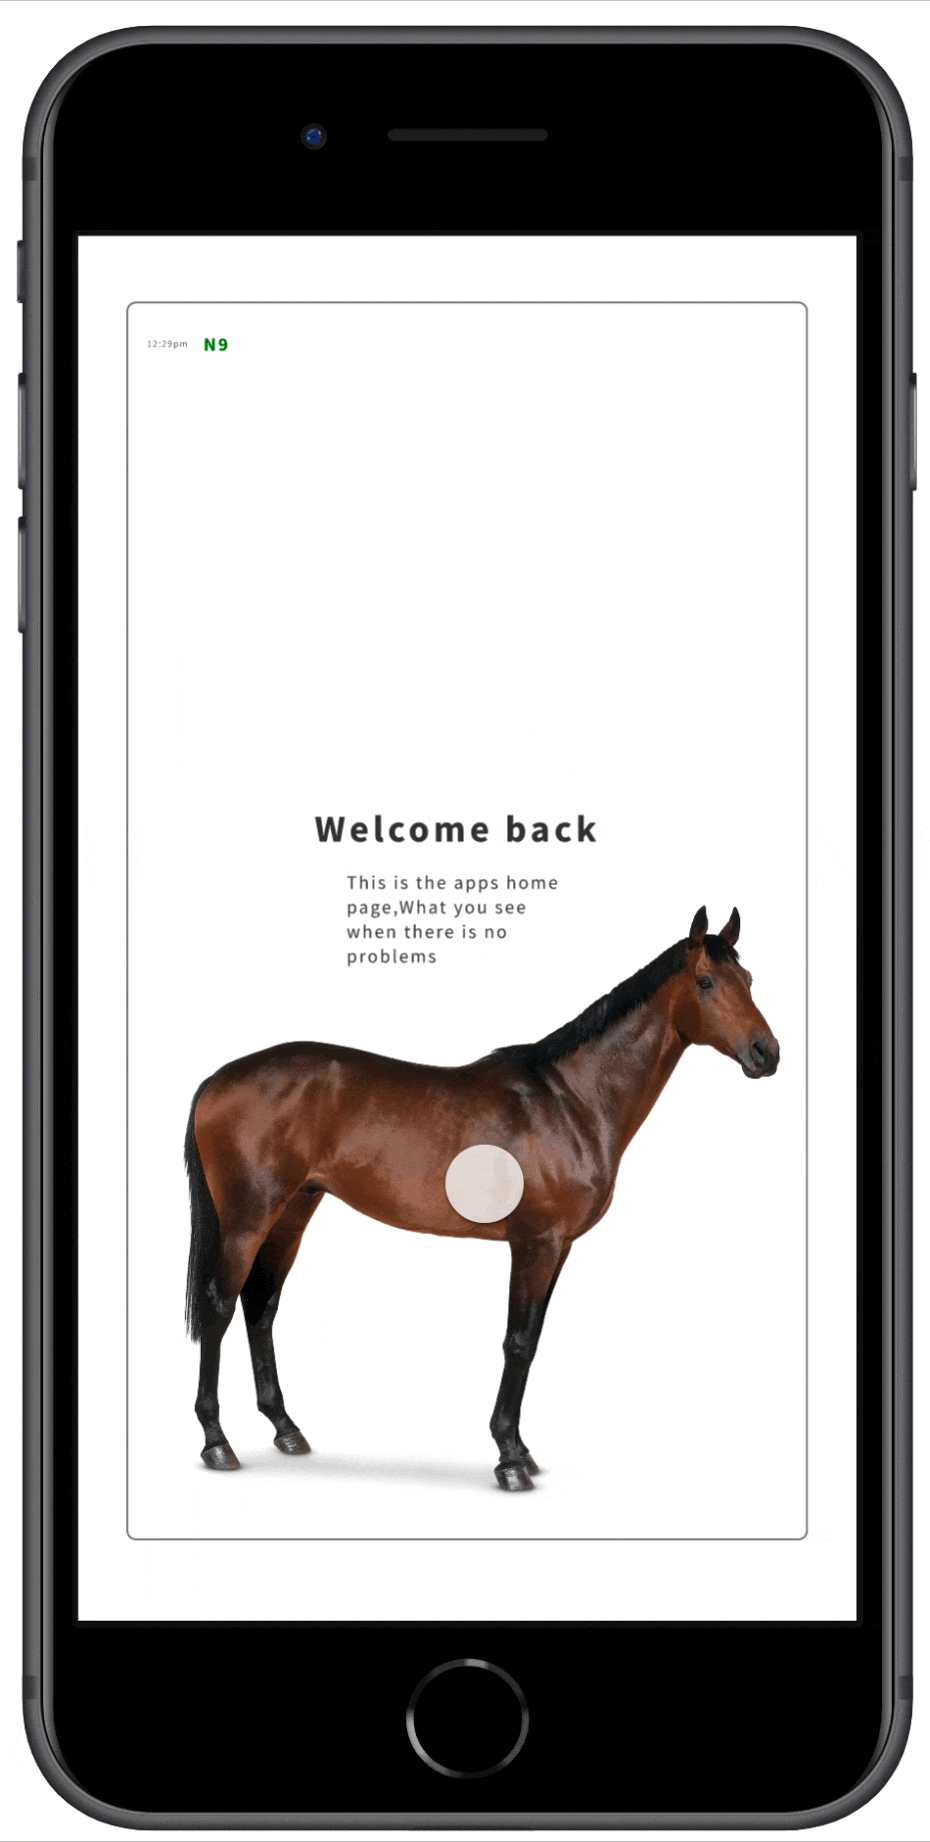 Abdul's portolio project tittled: N9, a Fitbit for Horses. image of the Equin management app.